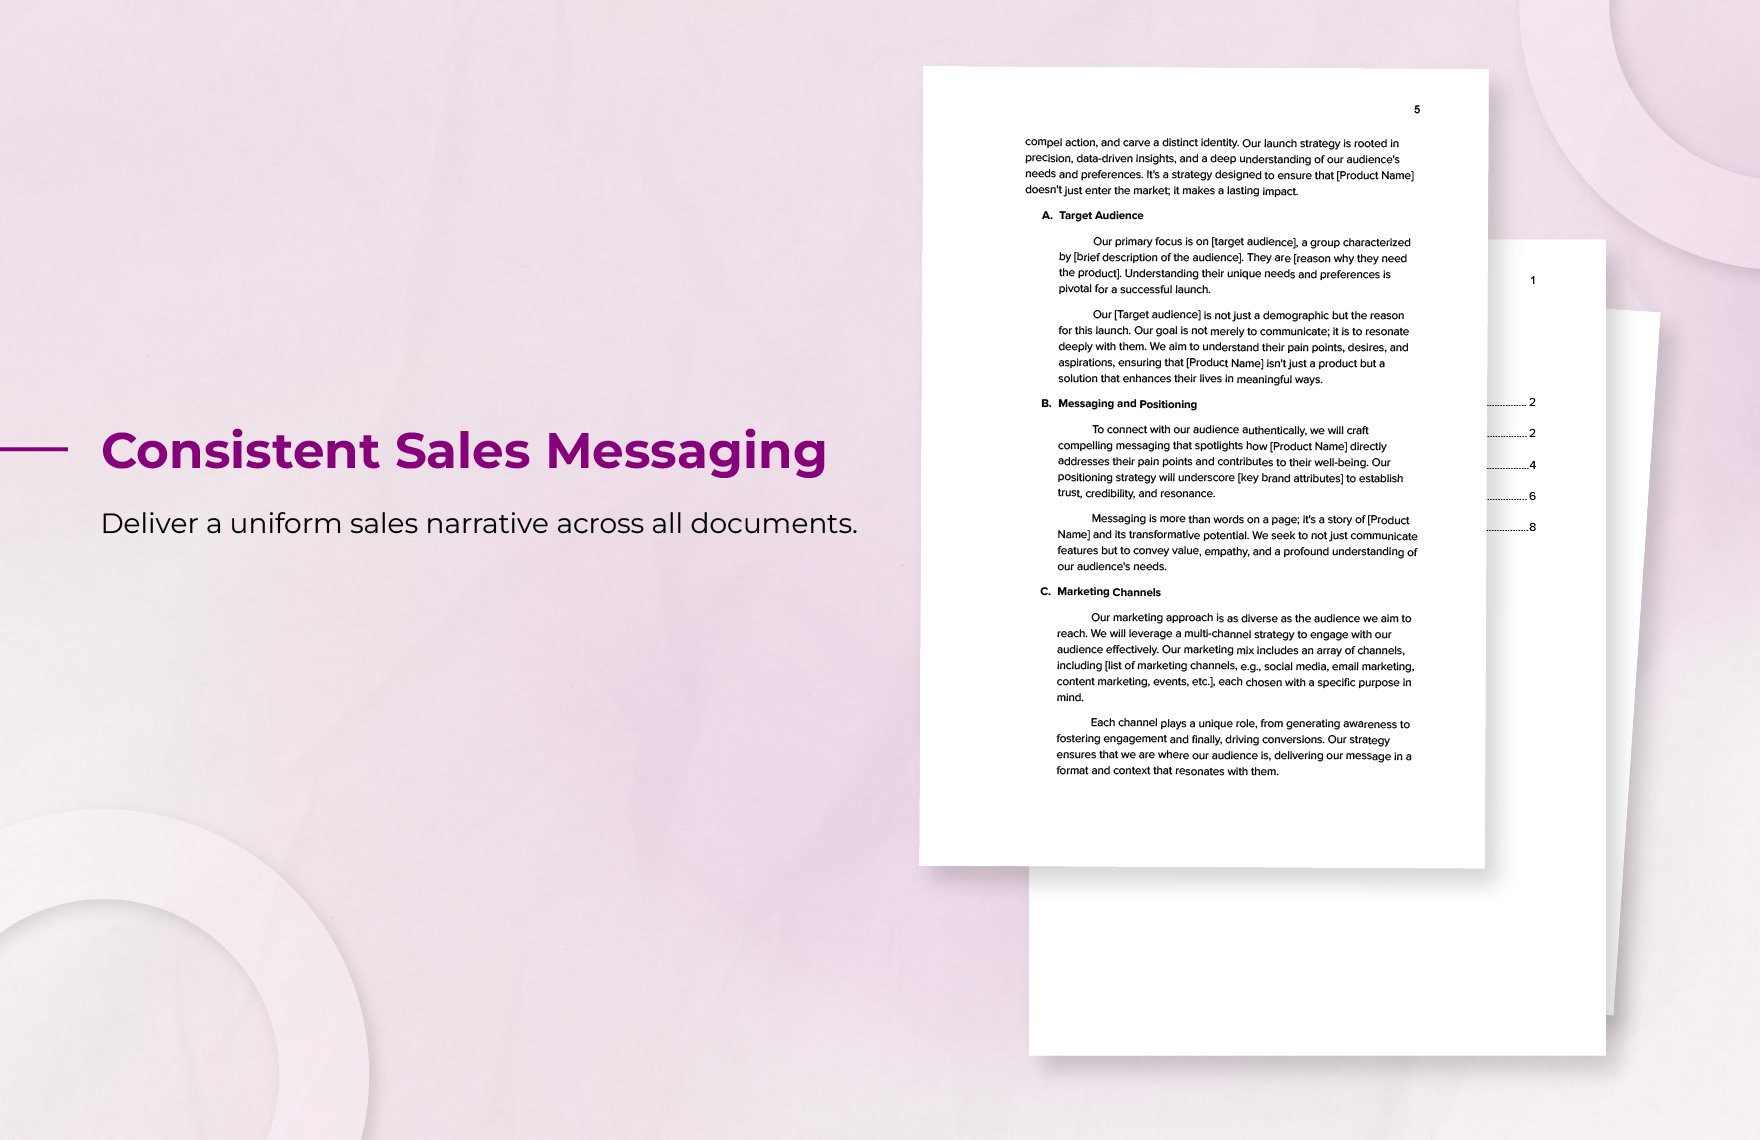 Sales Product Launch Proposal Template